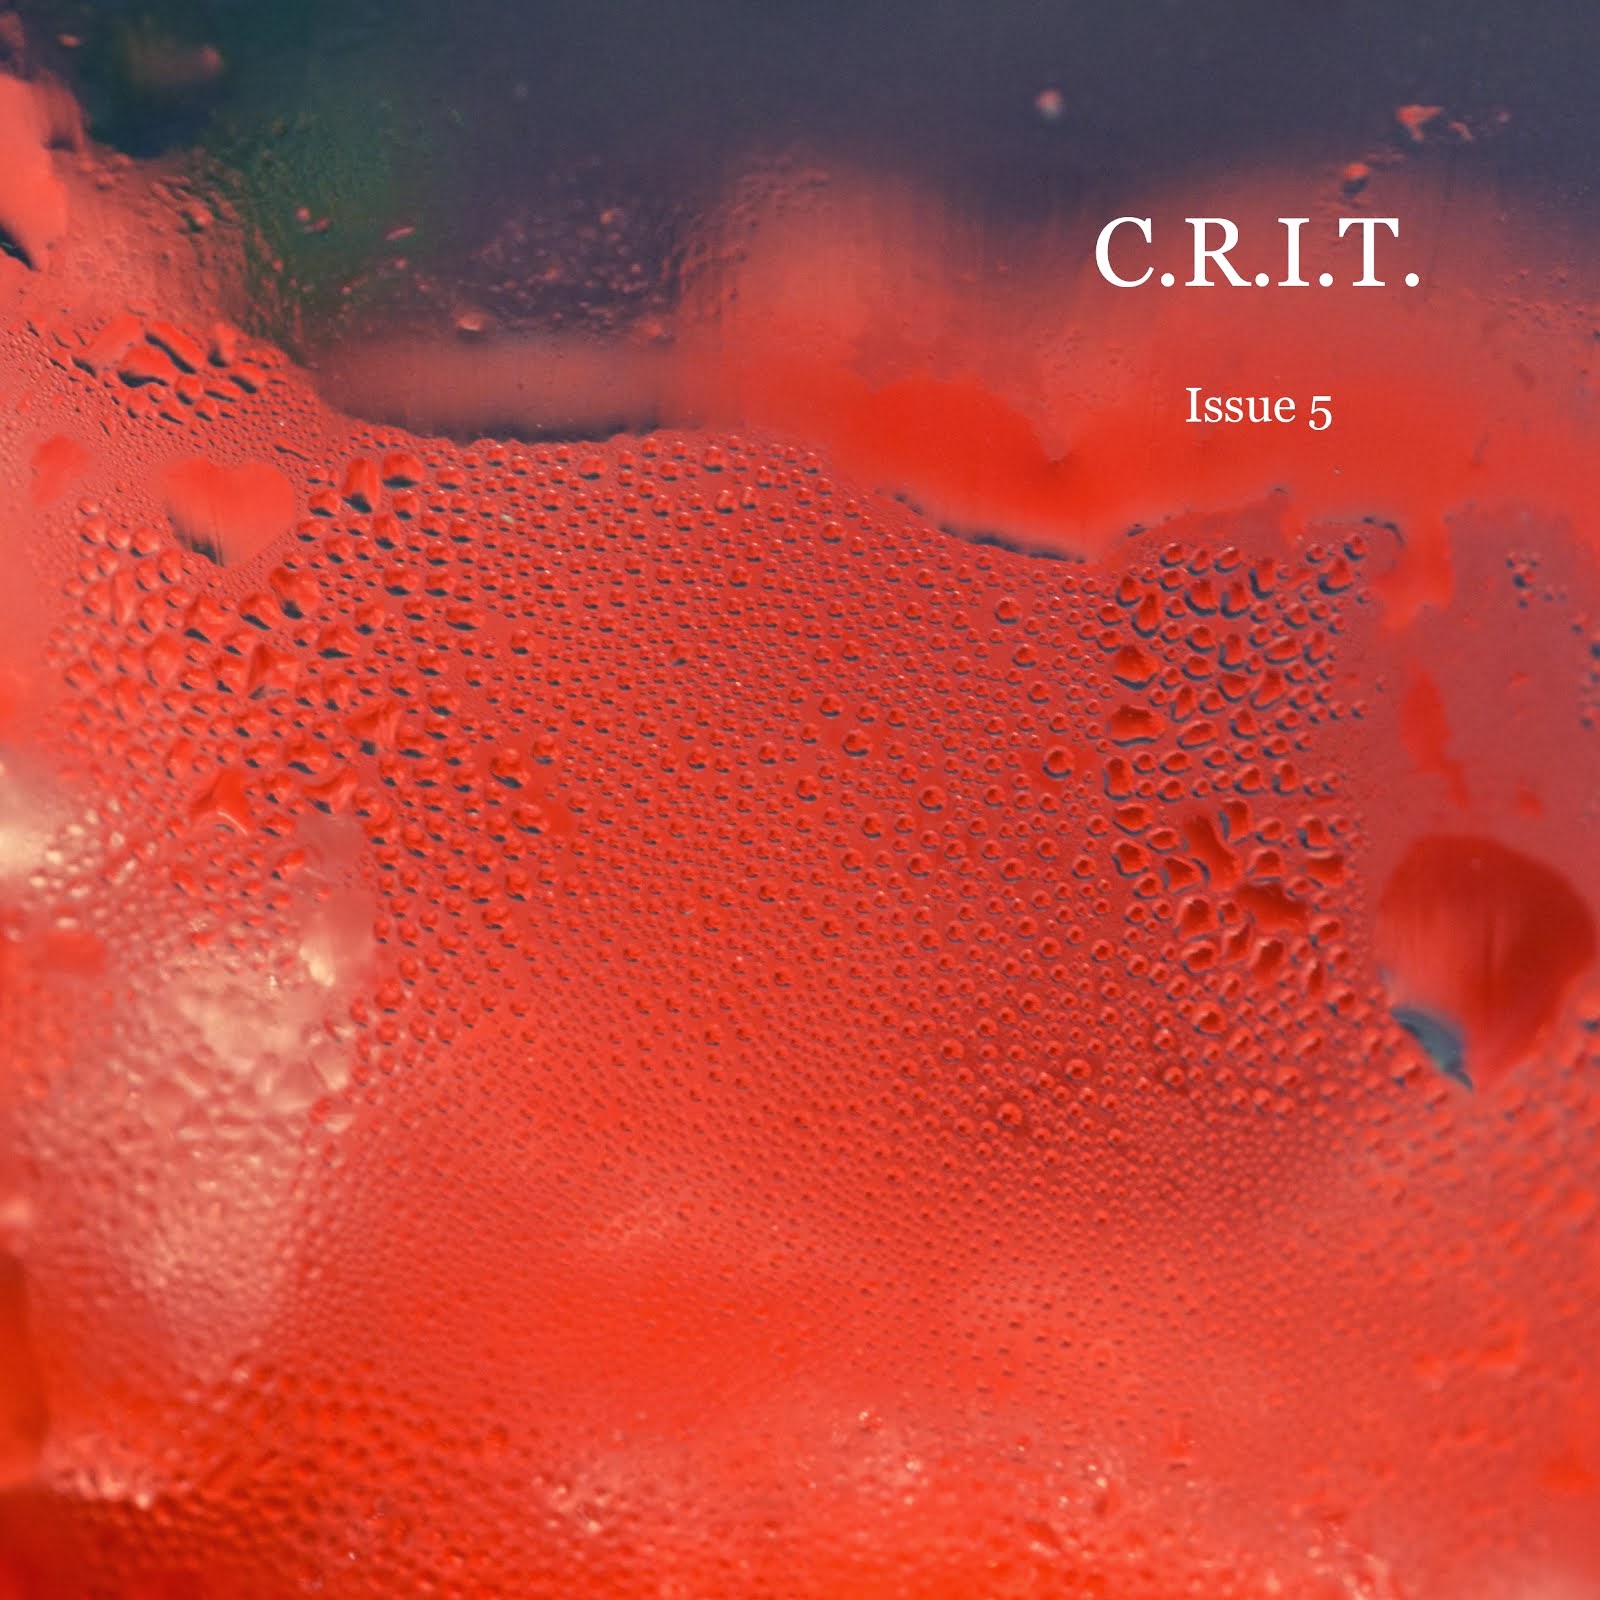 C.R.I.T. Issue 5 Fall 2013